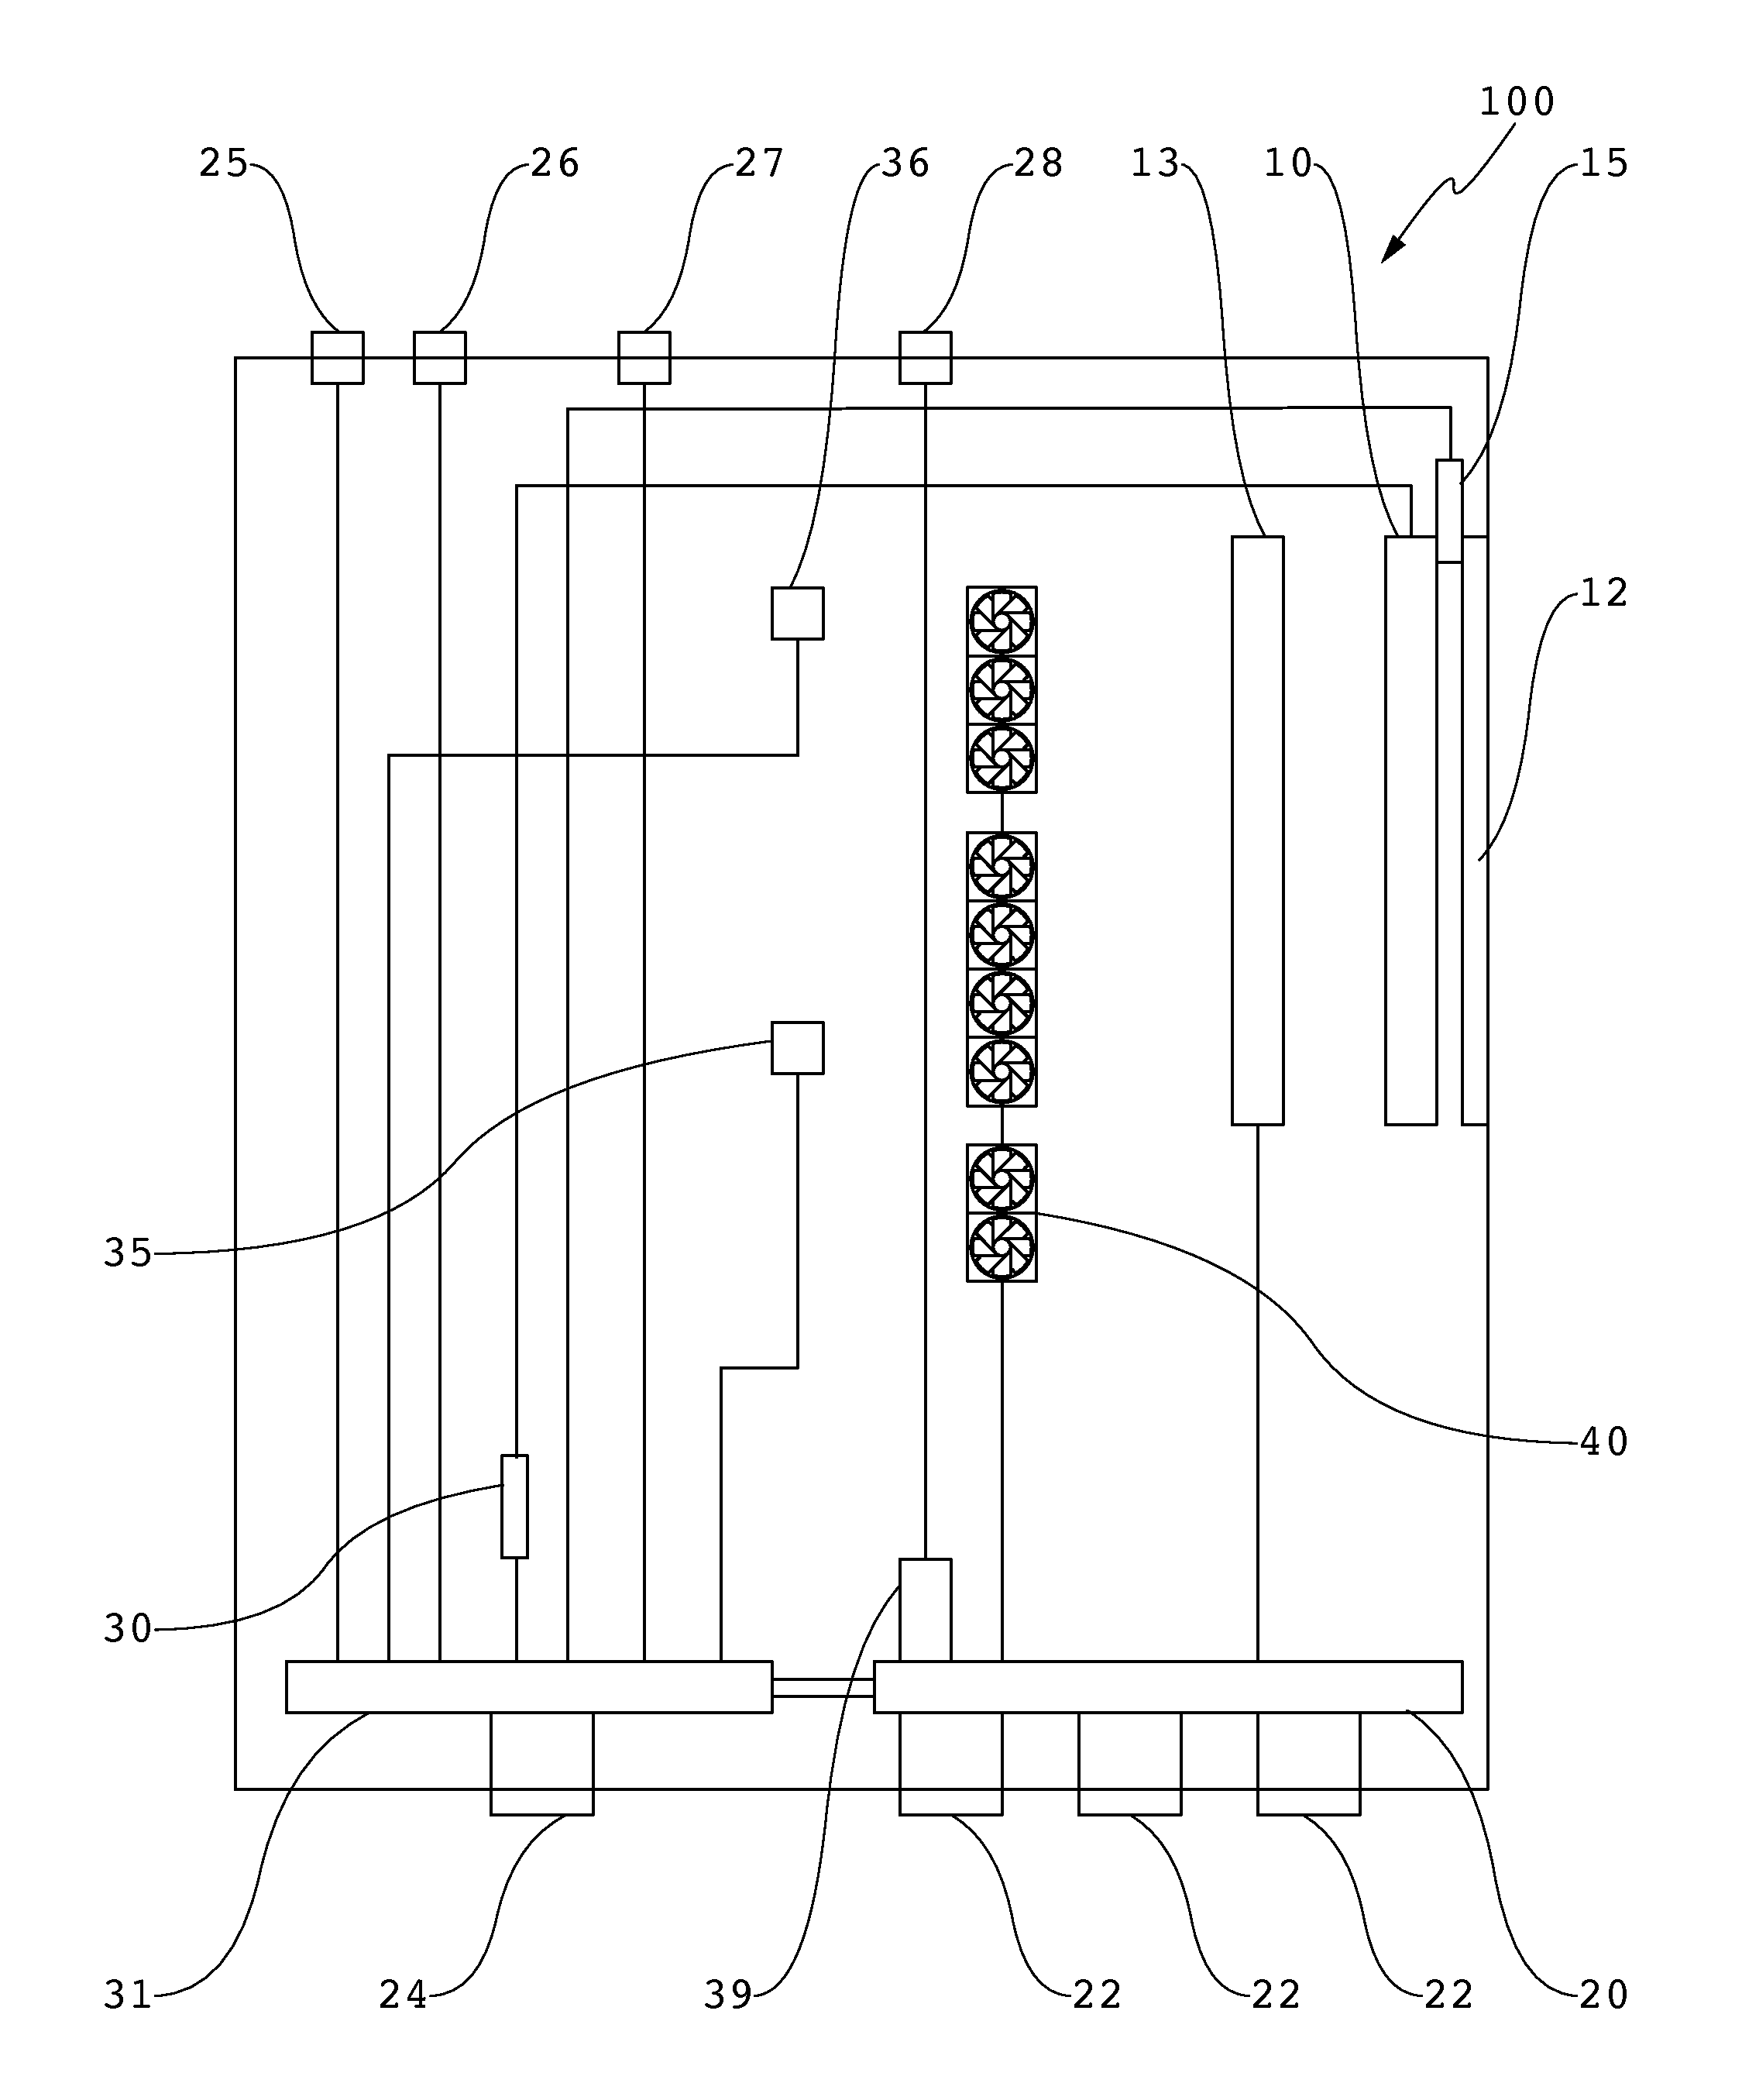 System and Method for Remotely Identifying Display Components